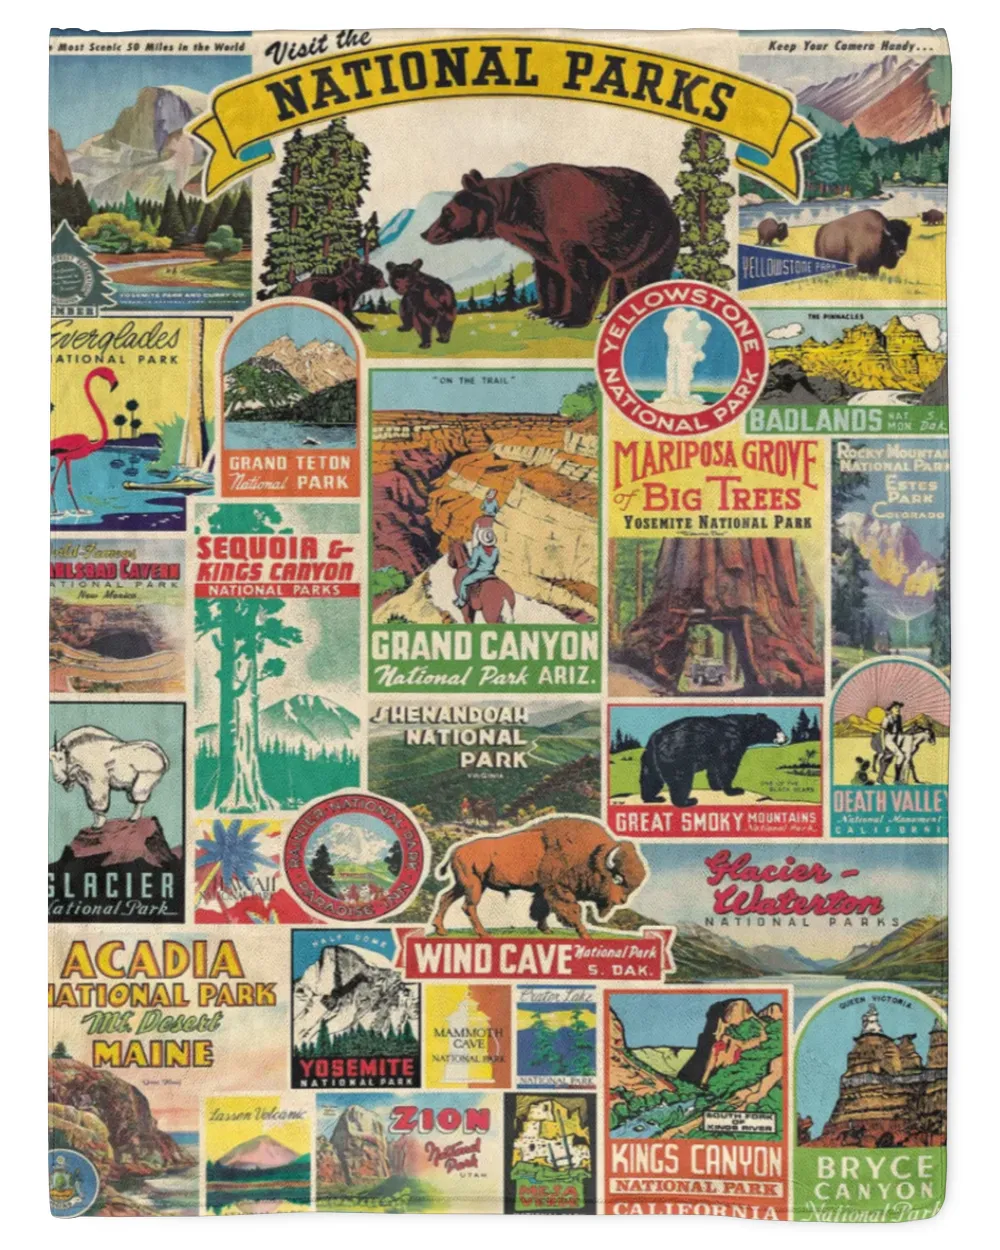 Nationnal Parks Plush Blanket (Printed in the EU)